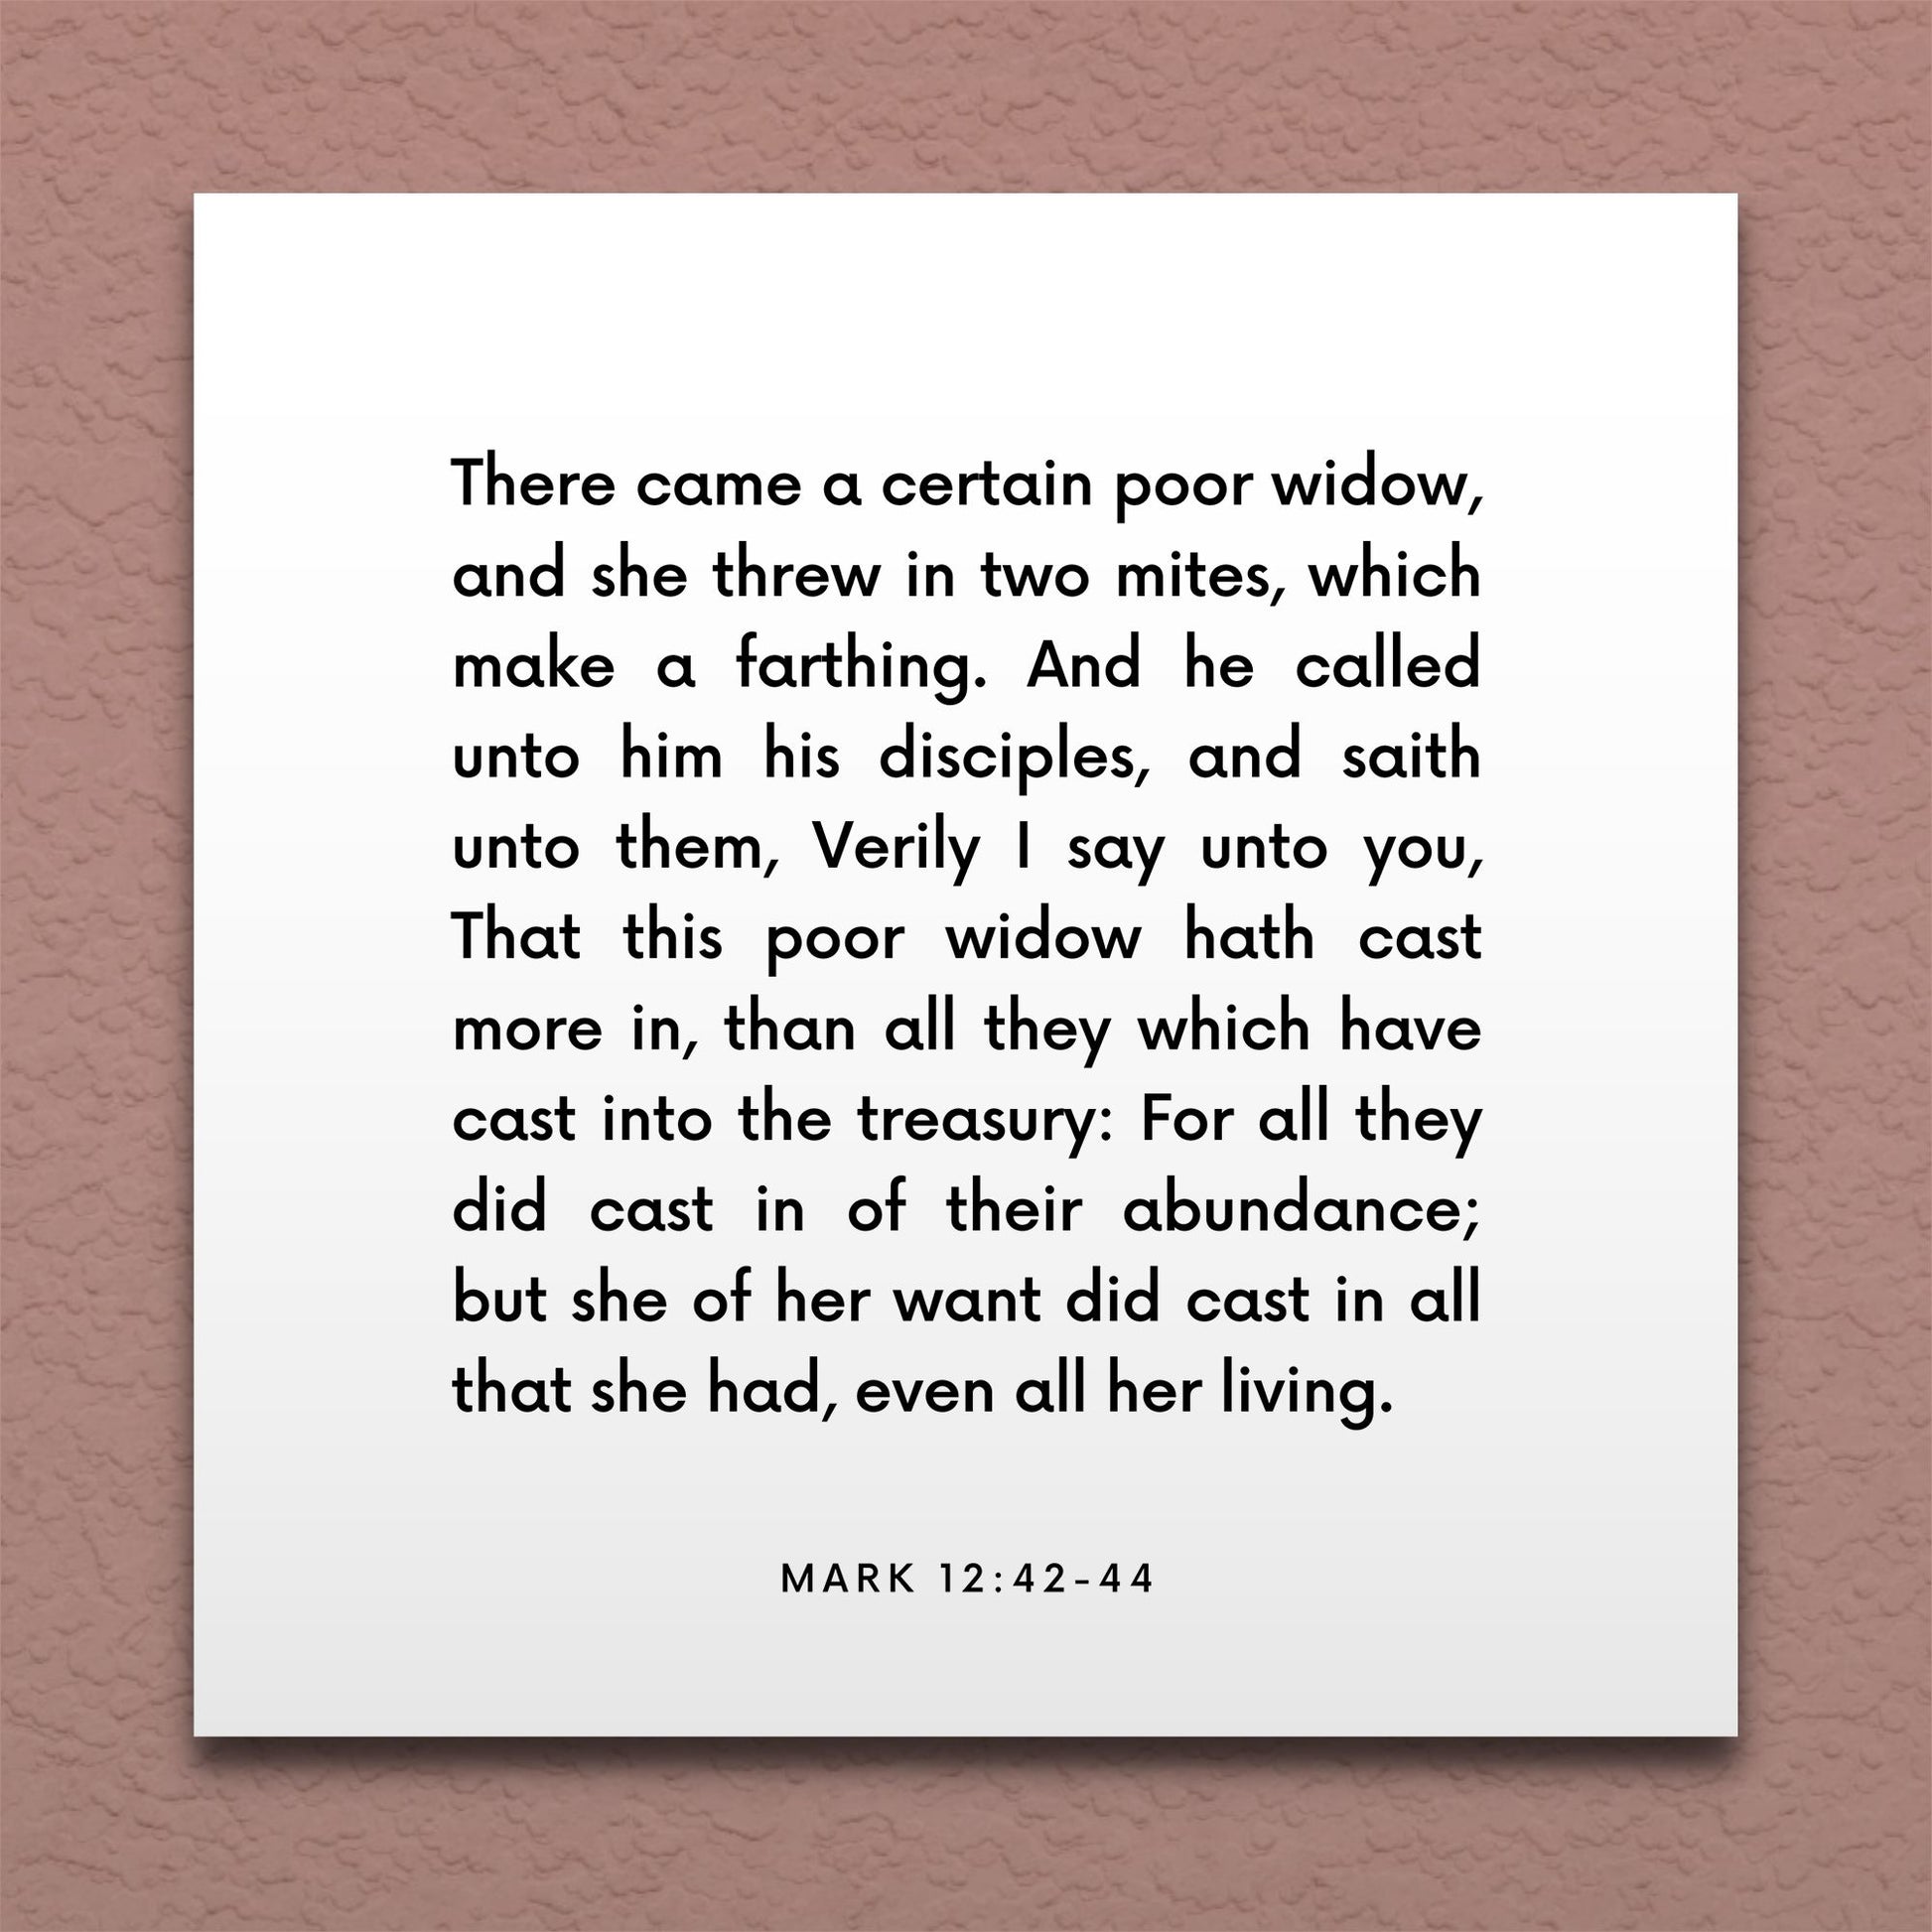 Wall-mounted scripture tile for Mark 12:42-44 - "This poor widow hath cast more in than all they"